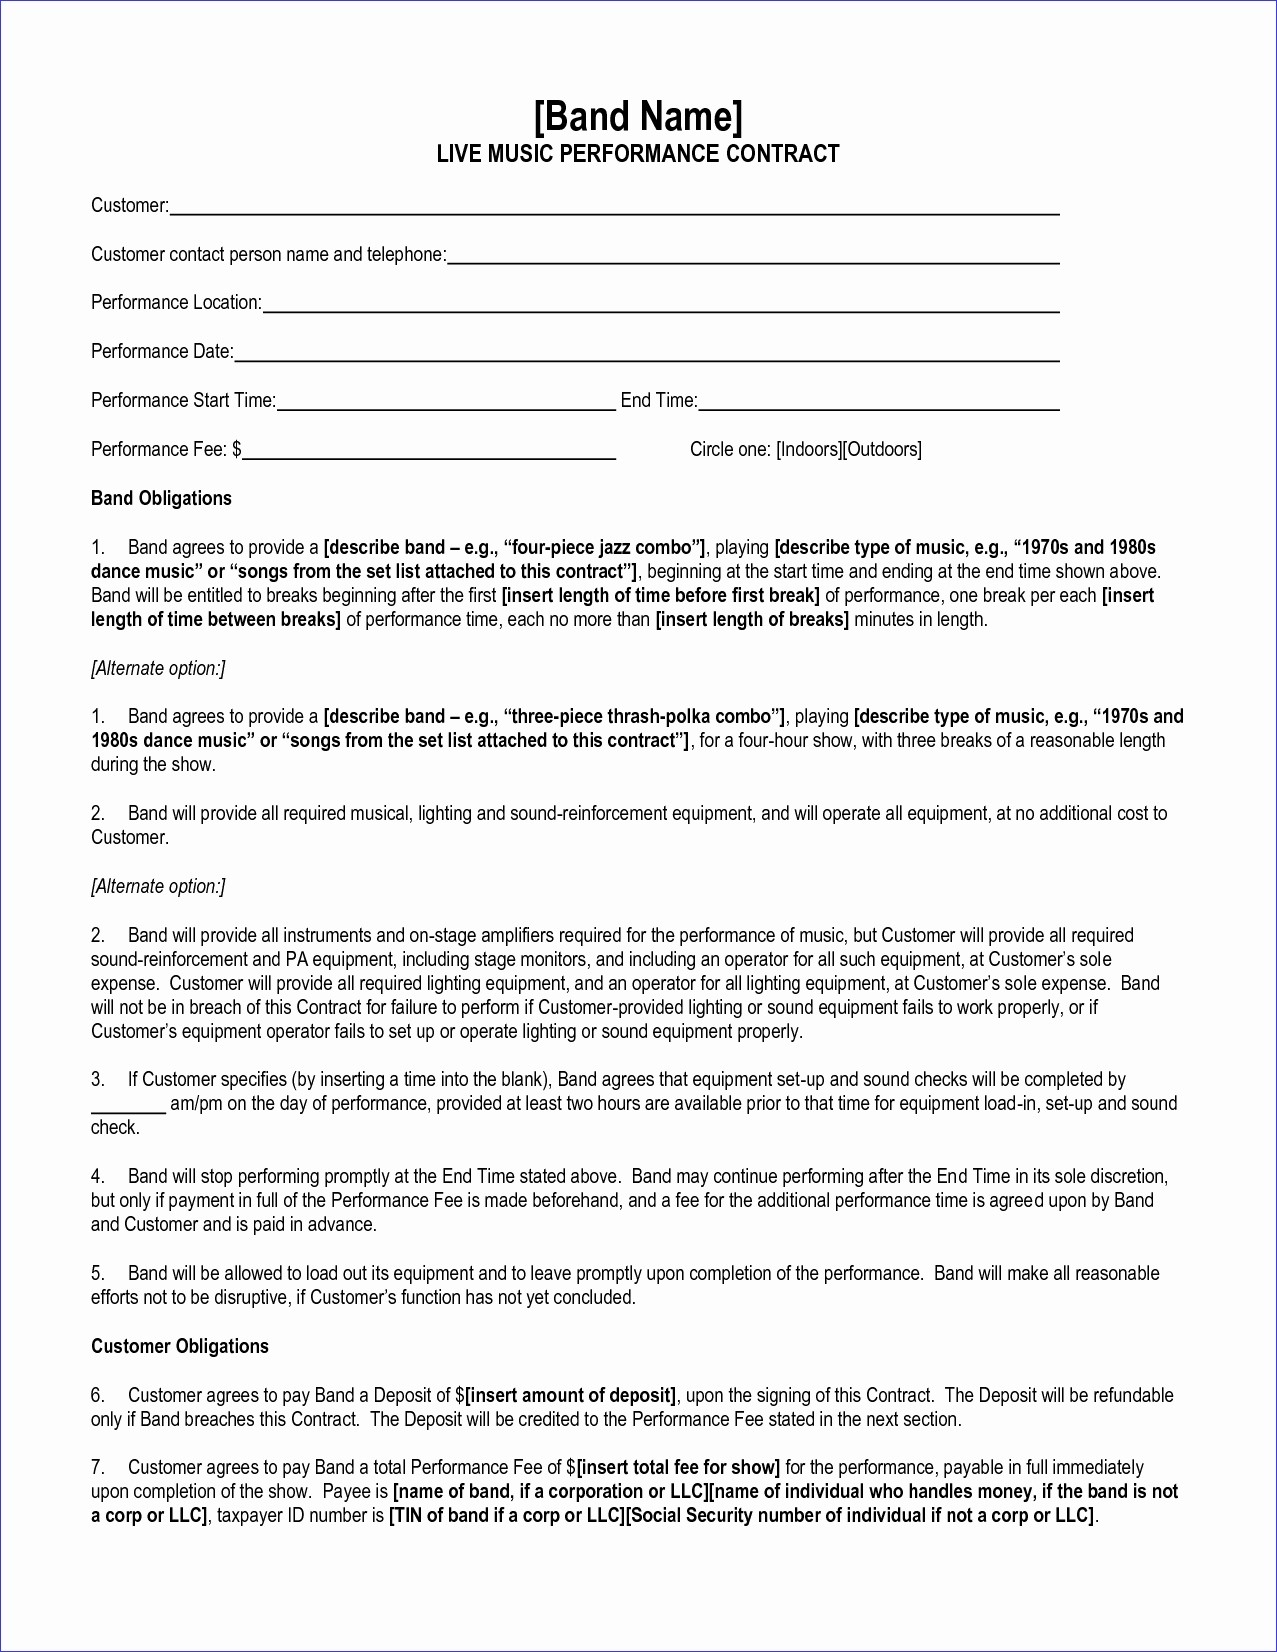 Free Entertainment Contract Templates Fresh Document